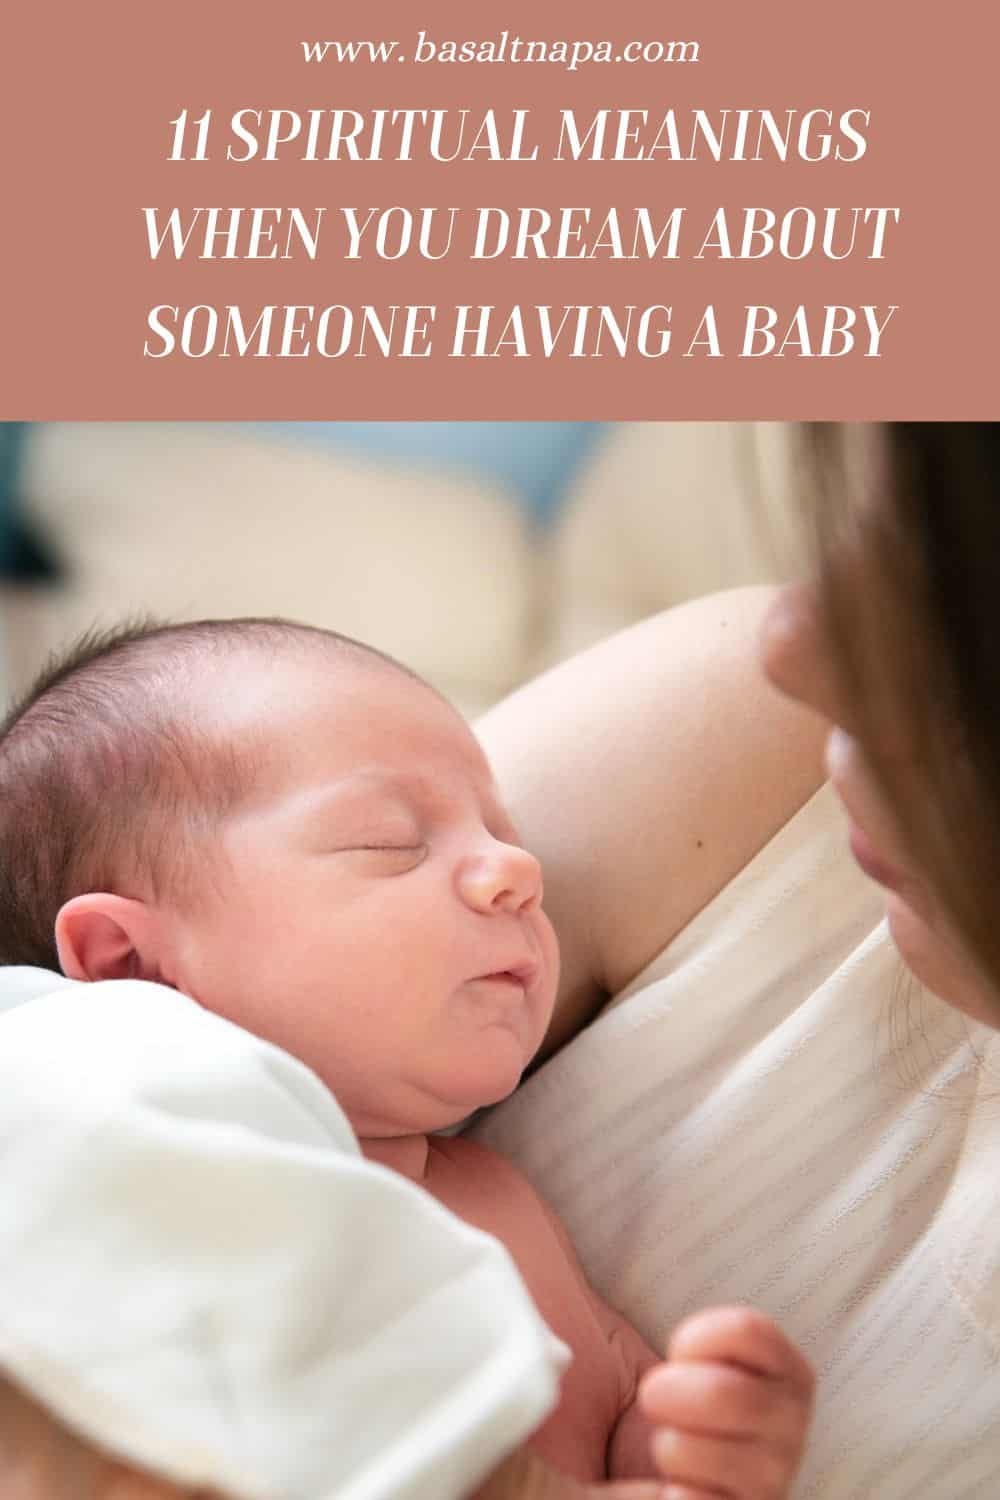 11 Spiritual Meanings When You Dream About Someone Having A Baby